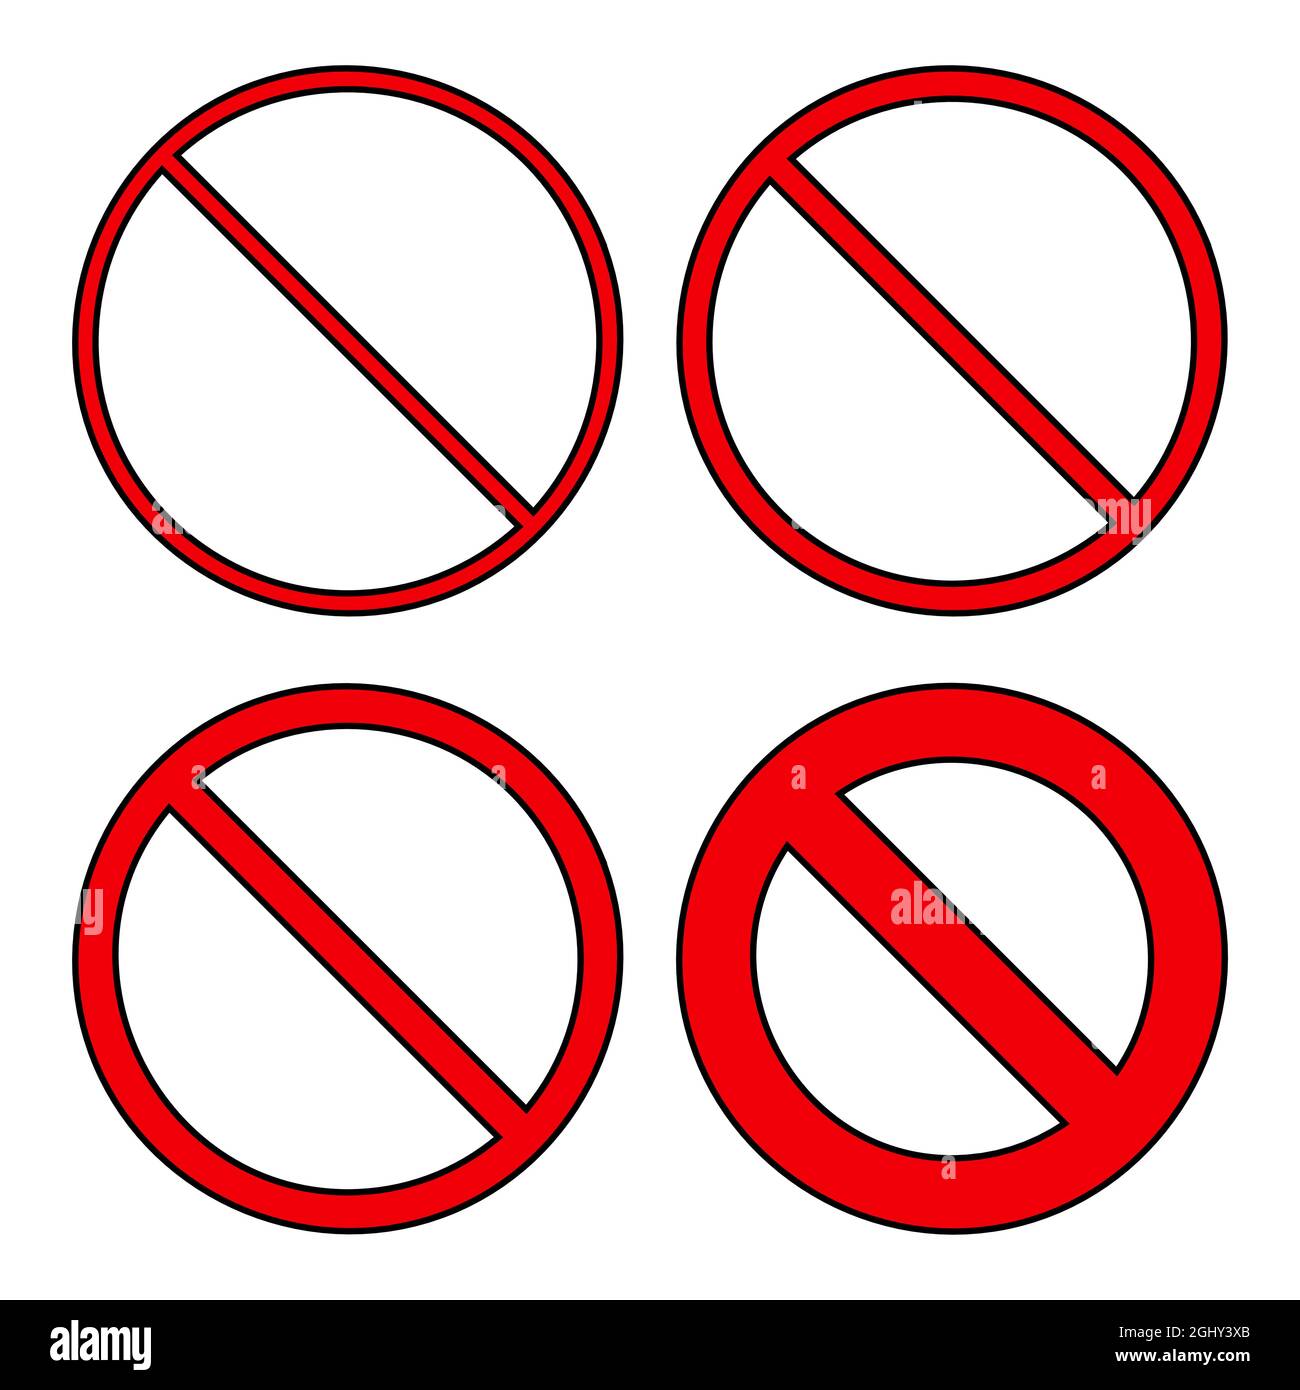 Forbidden symbol. Crossed red circle. No sign simple set. Vector illustration isolated on white. Stock Vector